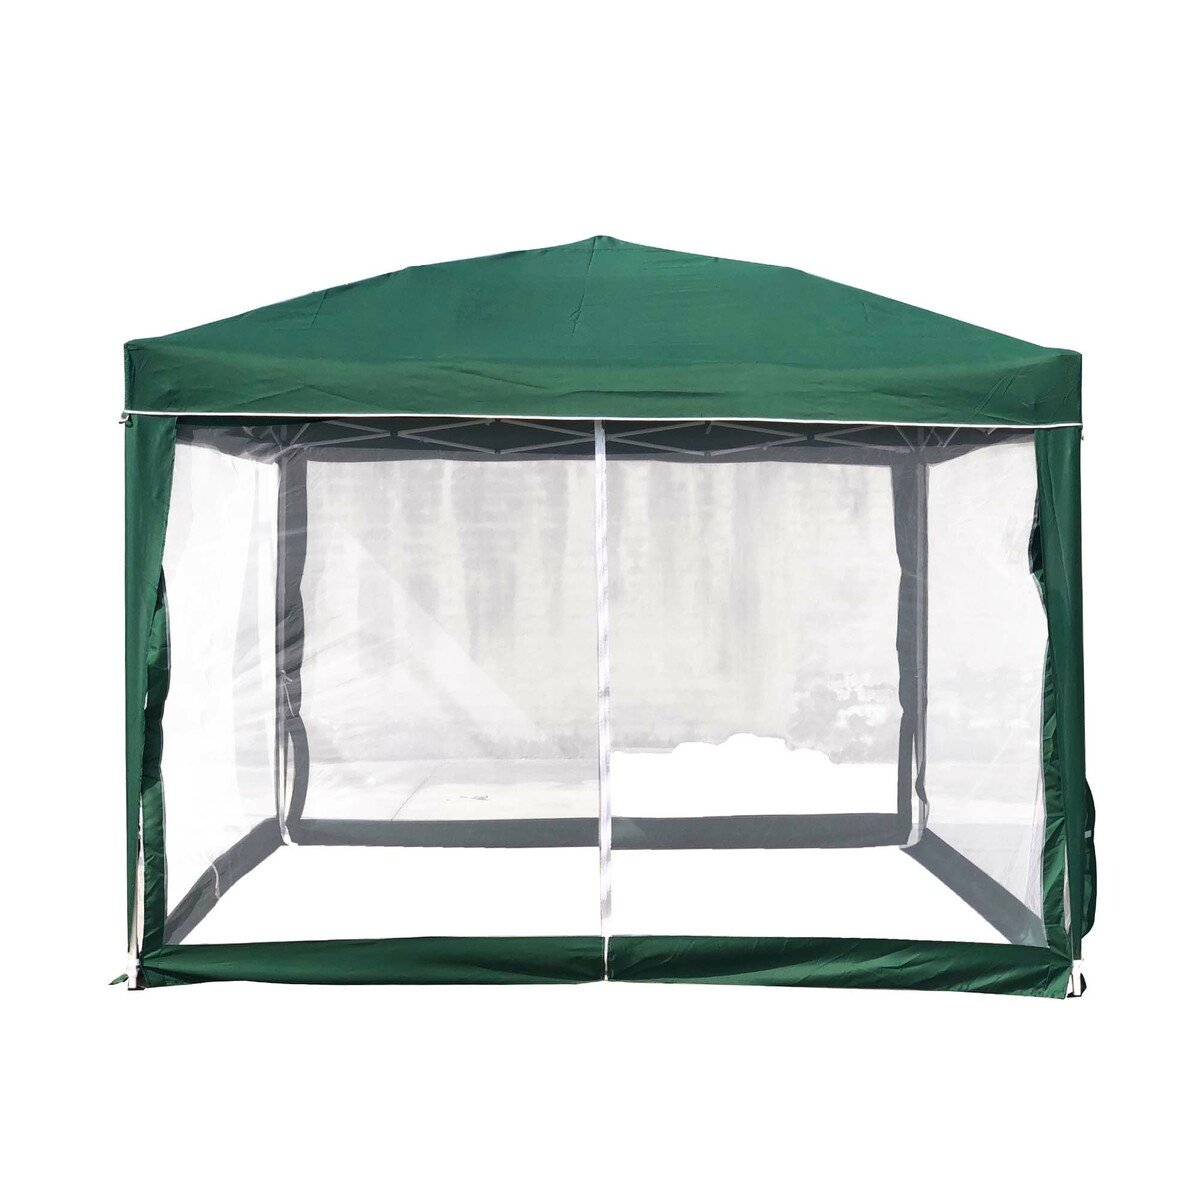 Relax Party Tent with Mosquito Net TP005M 3x3Mtr Assorted Colors